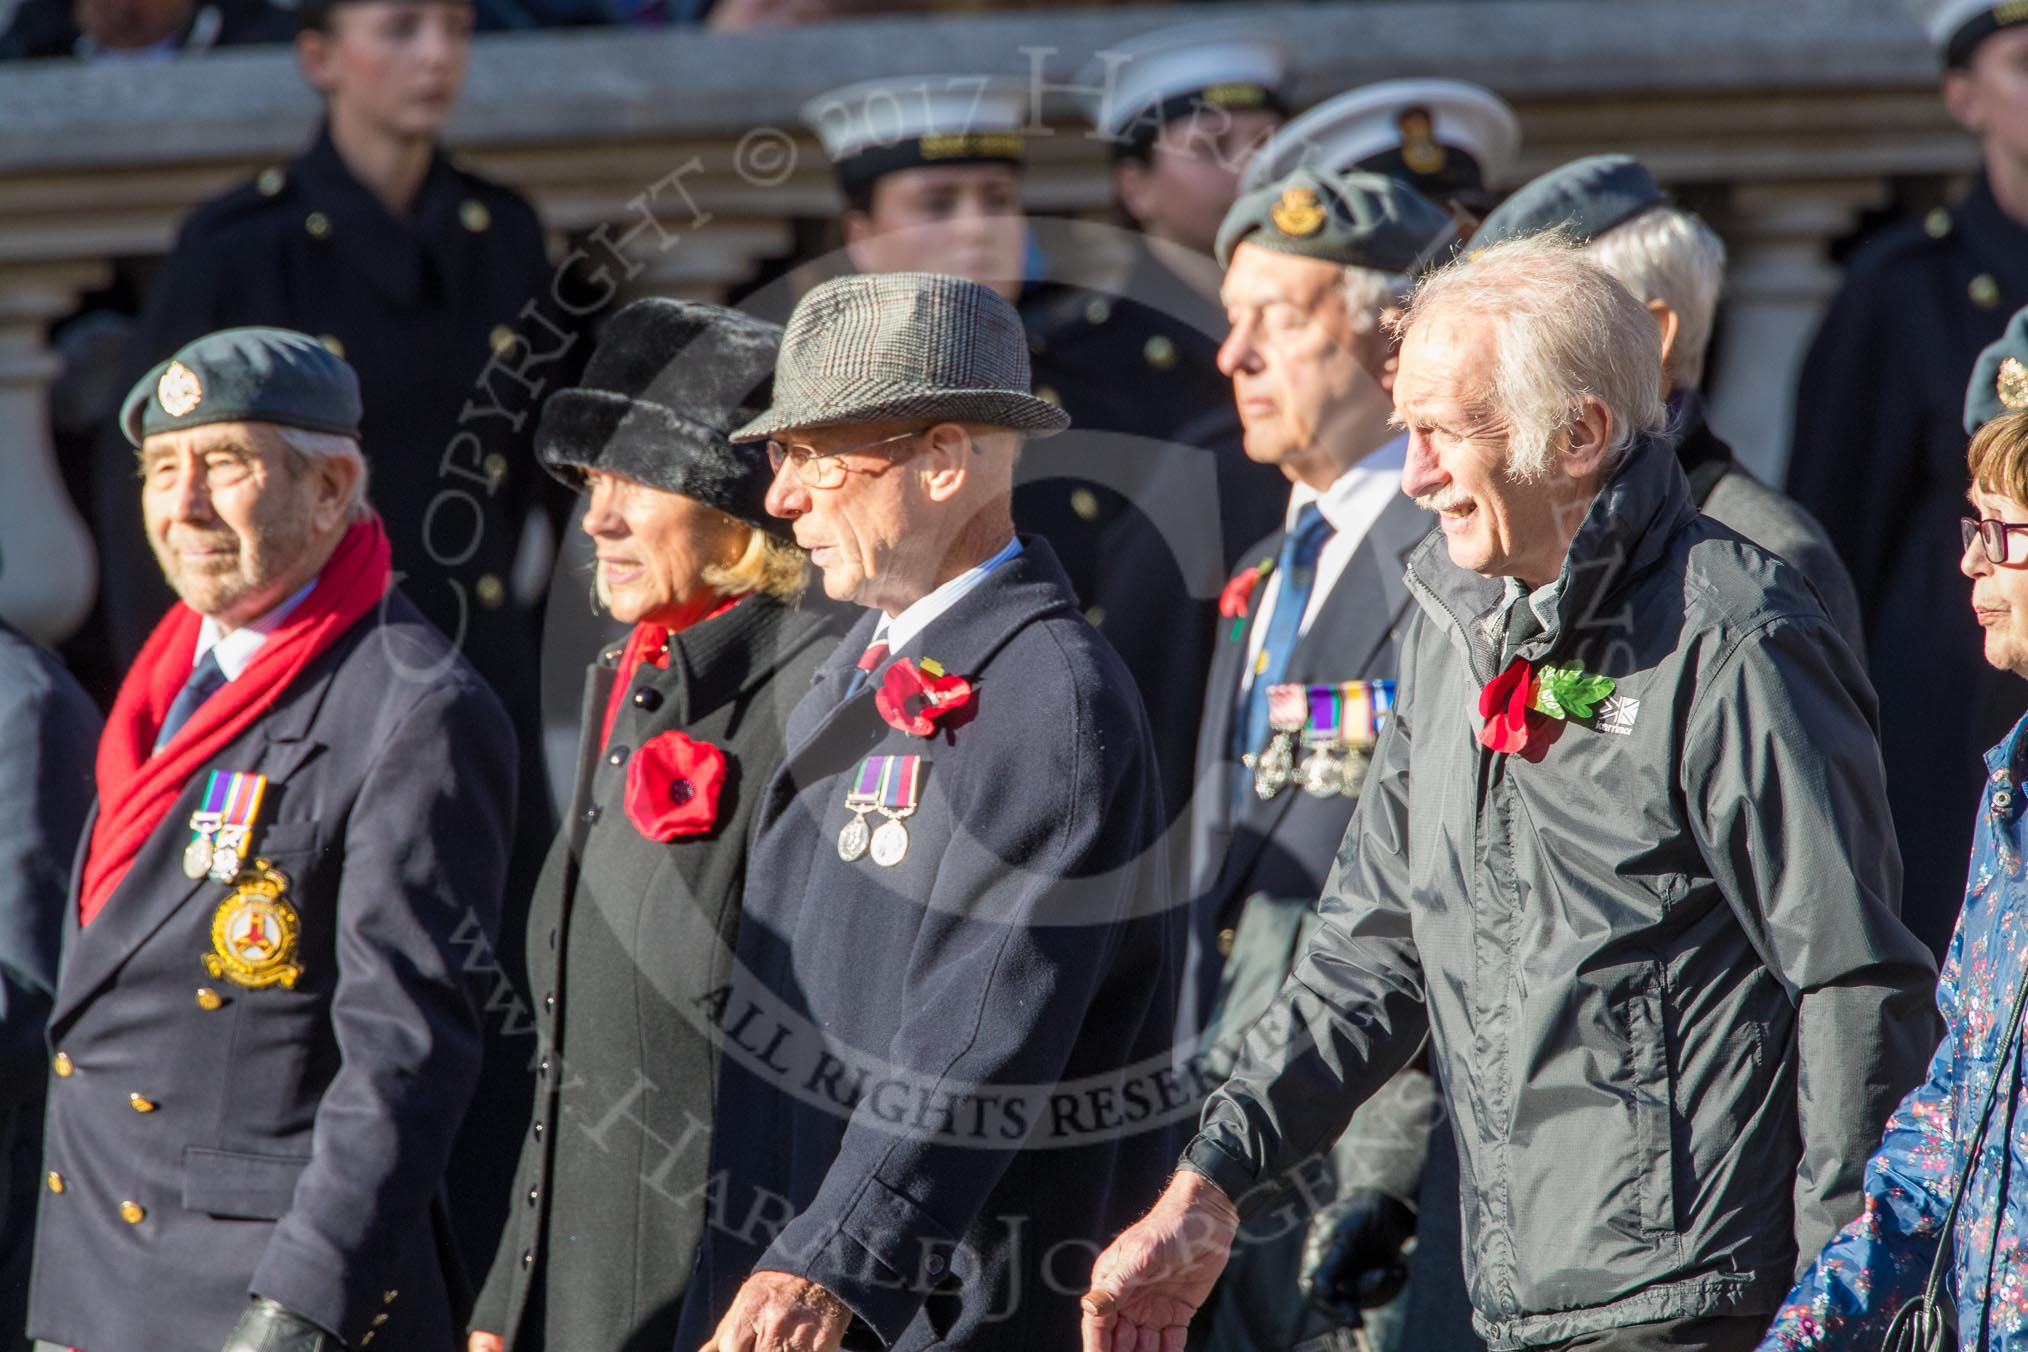 Units of the Far East Air Force (Group C13, 18 members) during the Royal British Legion March Past on Remembrance Sunday at the Cenotaph, Whitehall, Westminster, London, 11 November 2018, 12:16.